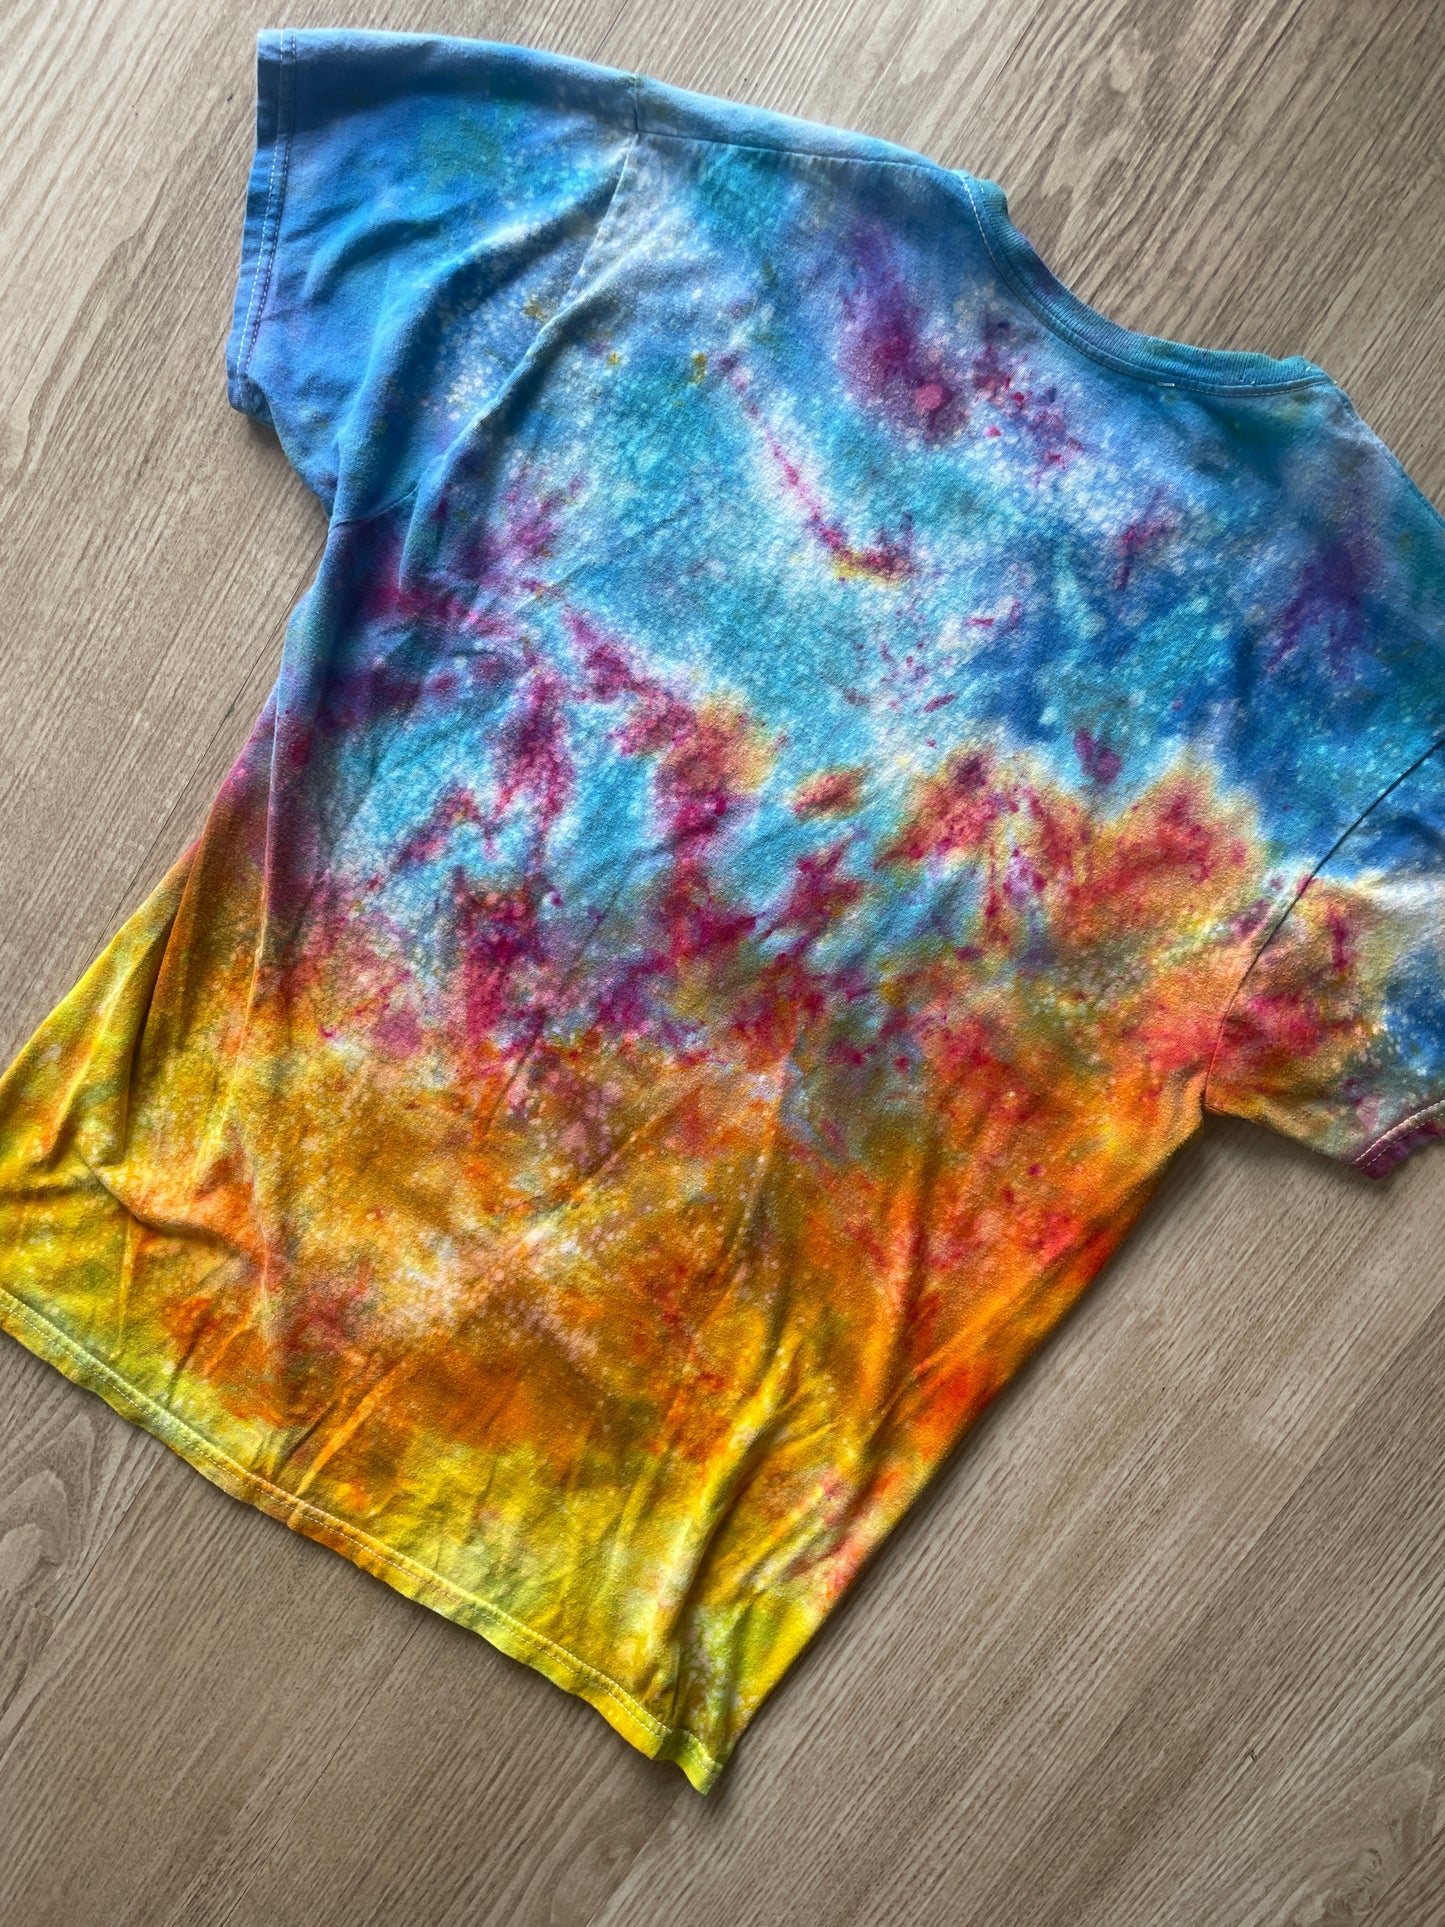 MEDIUM Men’s Prickly Pear Cactus Sunset Galaxy Tie Dye T-Shirt | One-Of-a-Kind Blue, Pink, and Yellow Crumpled Short Sleeve